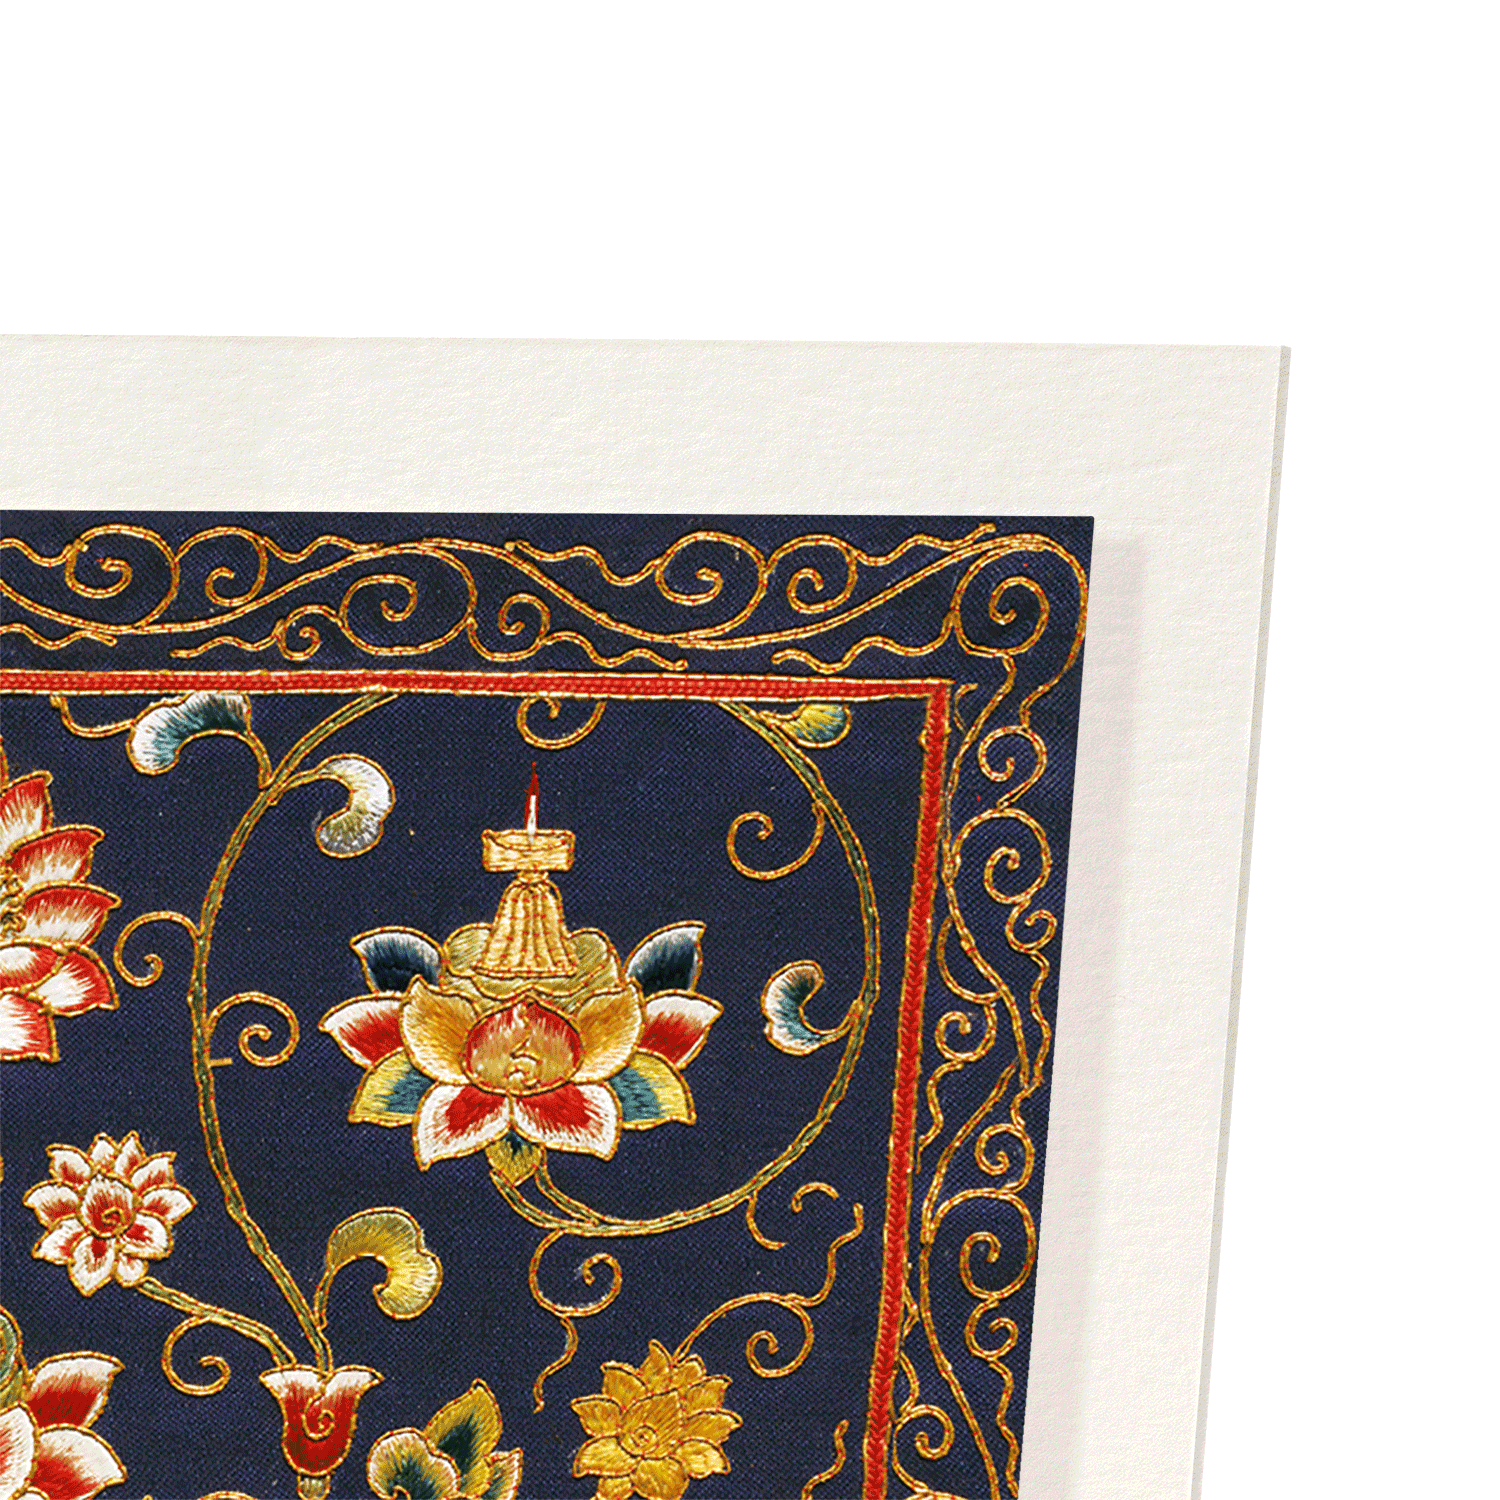 LOTUS FLOWER EMBROIDERY (14TH C)